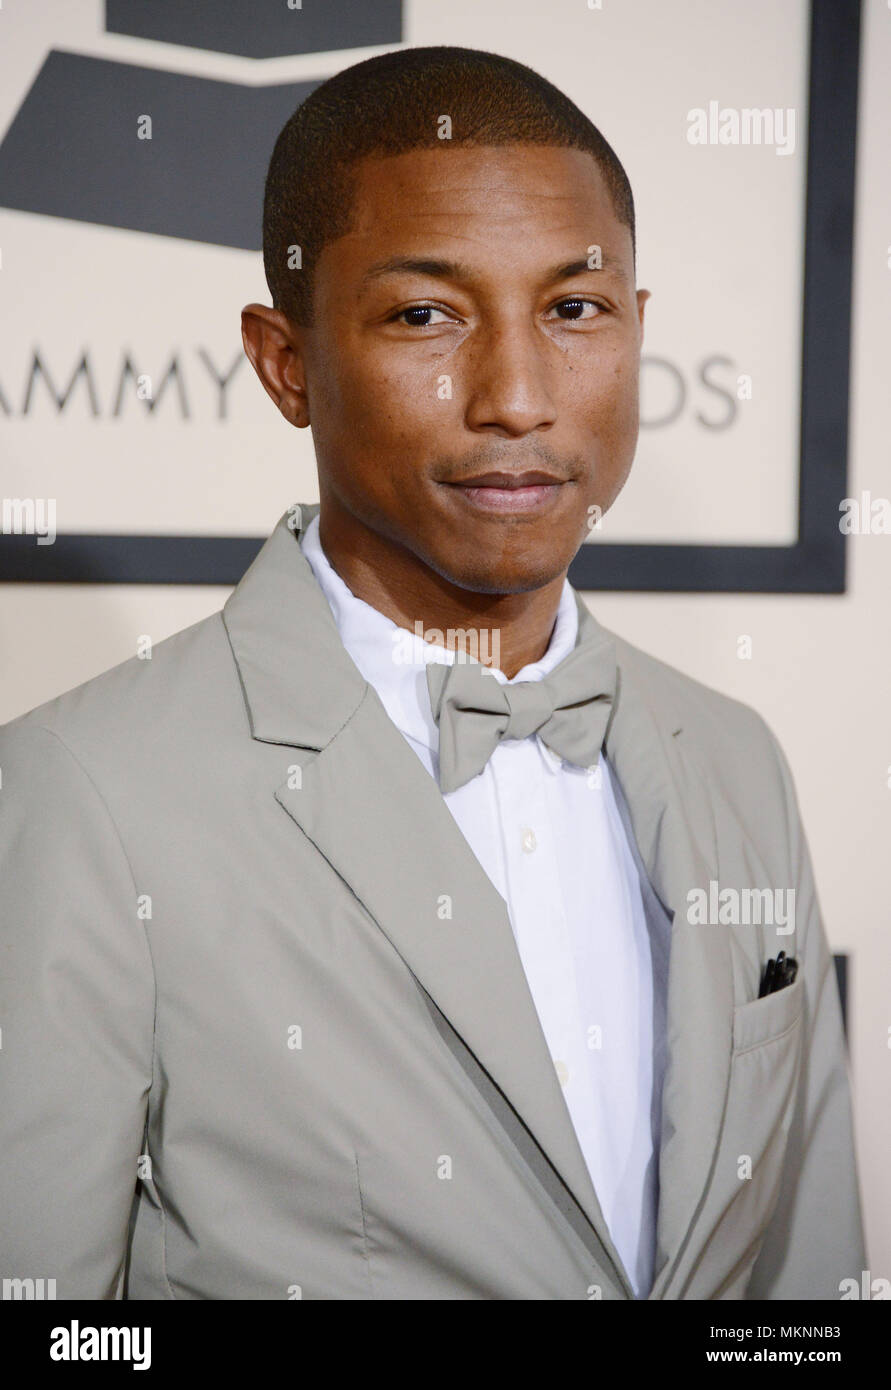 pharrell williams at  the 57th Annual GRAMMY Awards at the Staples Center in Los Angeles. February 8, 2015.pharrell williams  Event in Hollywood Life - California,  Red Carpet Event, Vertical, USA, Film Industry, Celebrities,  Photography, Bestof, Arts Culture and Entertainment, Topix Celebrities fashion / one person, Vertical, Best of, Hollywood Life, Event in Hollywood Life - California,  Red Carpet and backstage, USA, Film Industry, Celebrities,  movie celebrities, TV celebrities, Music celebrities, Photography, Bestof, Arts Culture and Entertainment,  Topix, headshot, vertical, from the ye Stock Photo